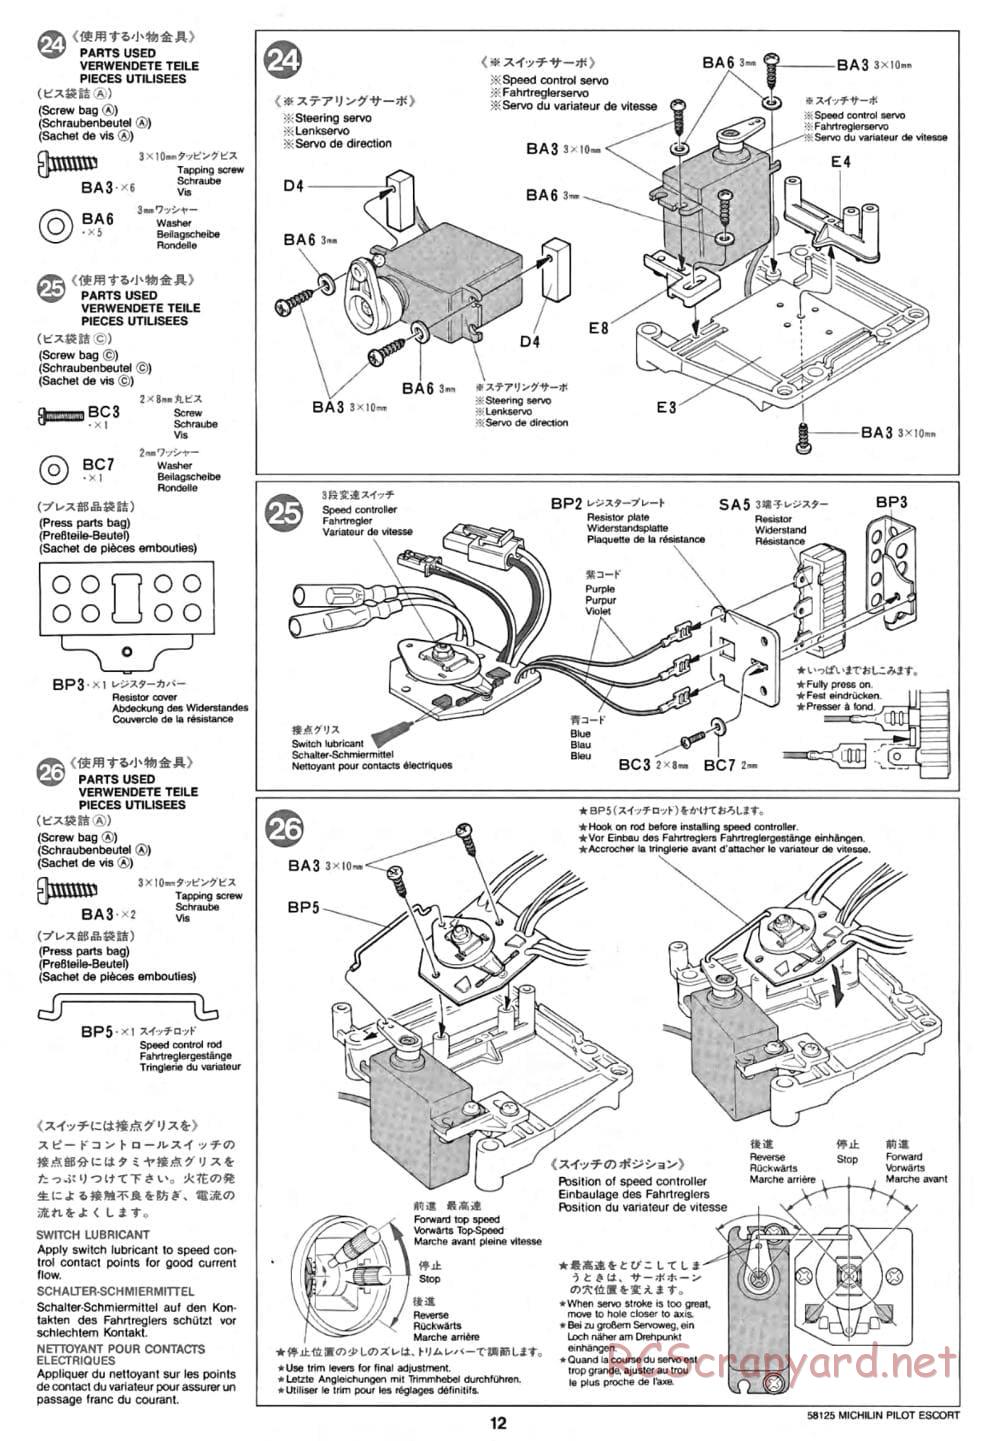 Tamiya - Michelin Pilot Ford Escort RS Cosworth - TA-01 Chassis - Manual - Page 12